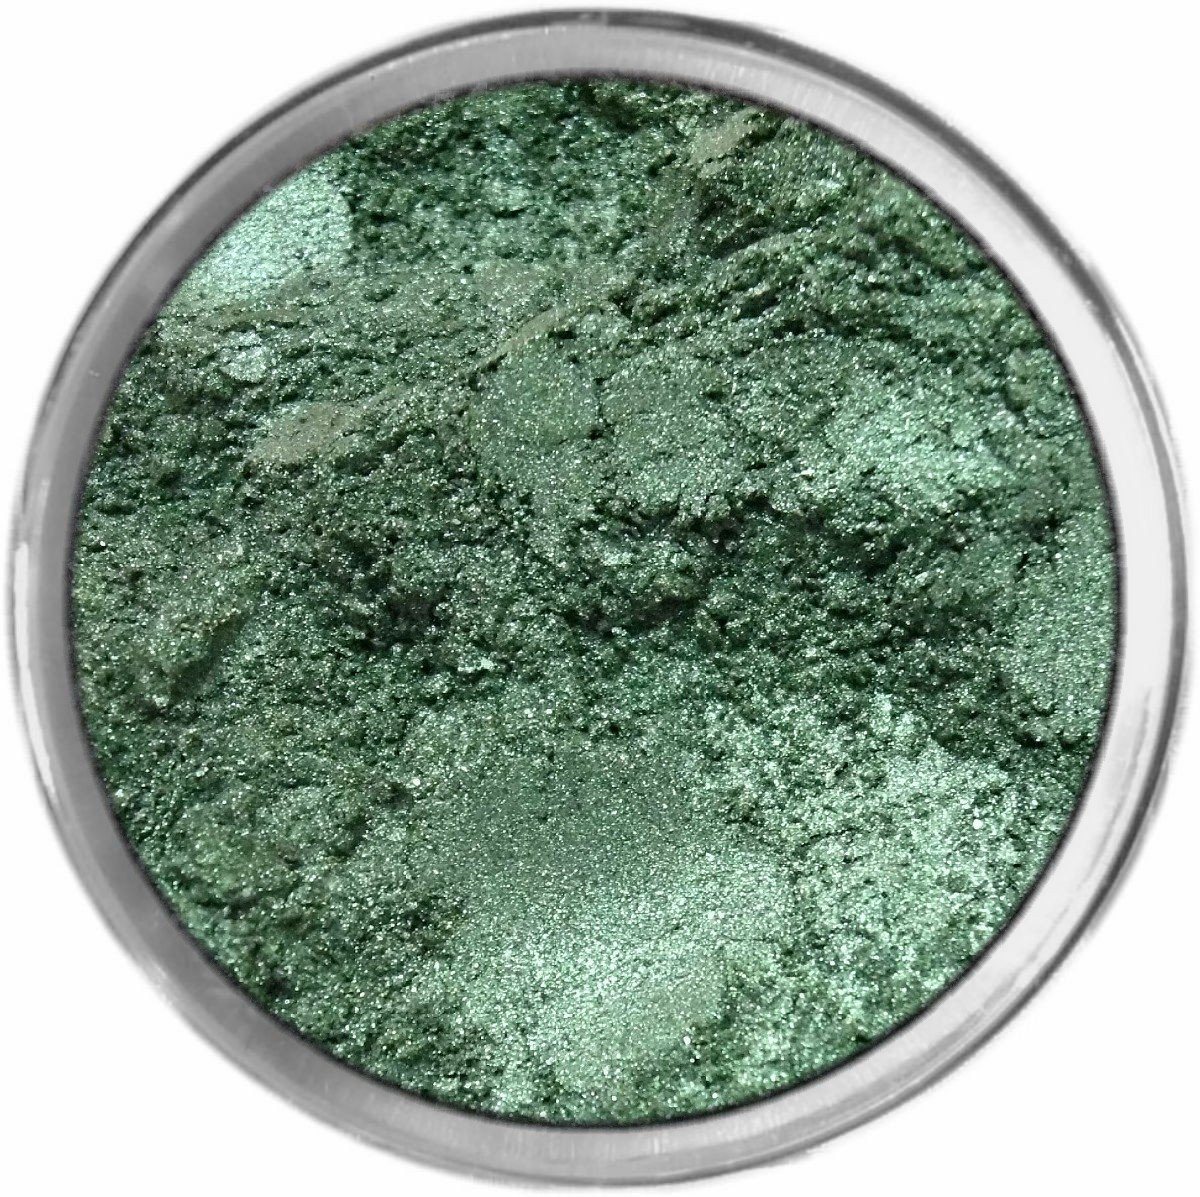 SPRUCE Multi-Use Loose Mineral Powder Pigment Color Loose Mineral Multi-Use Colors M*A*D Minerals Makeup 